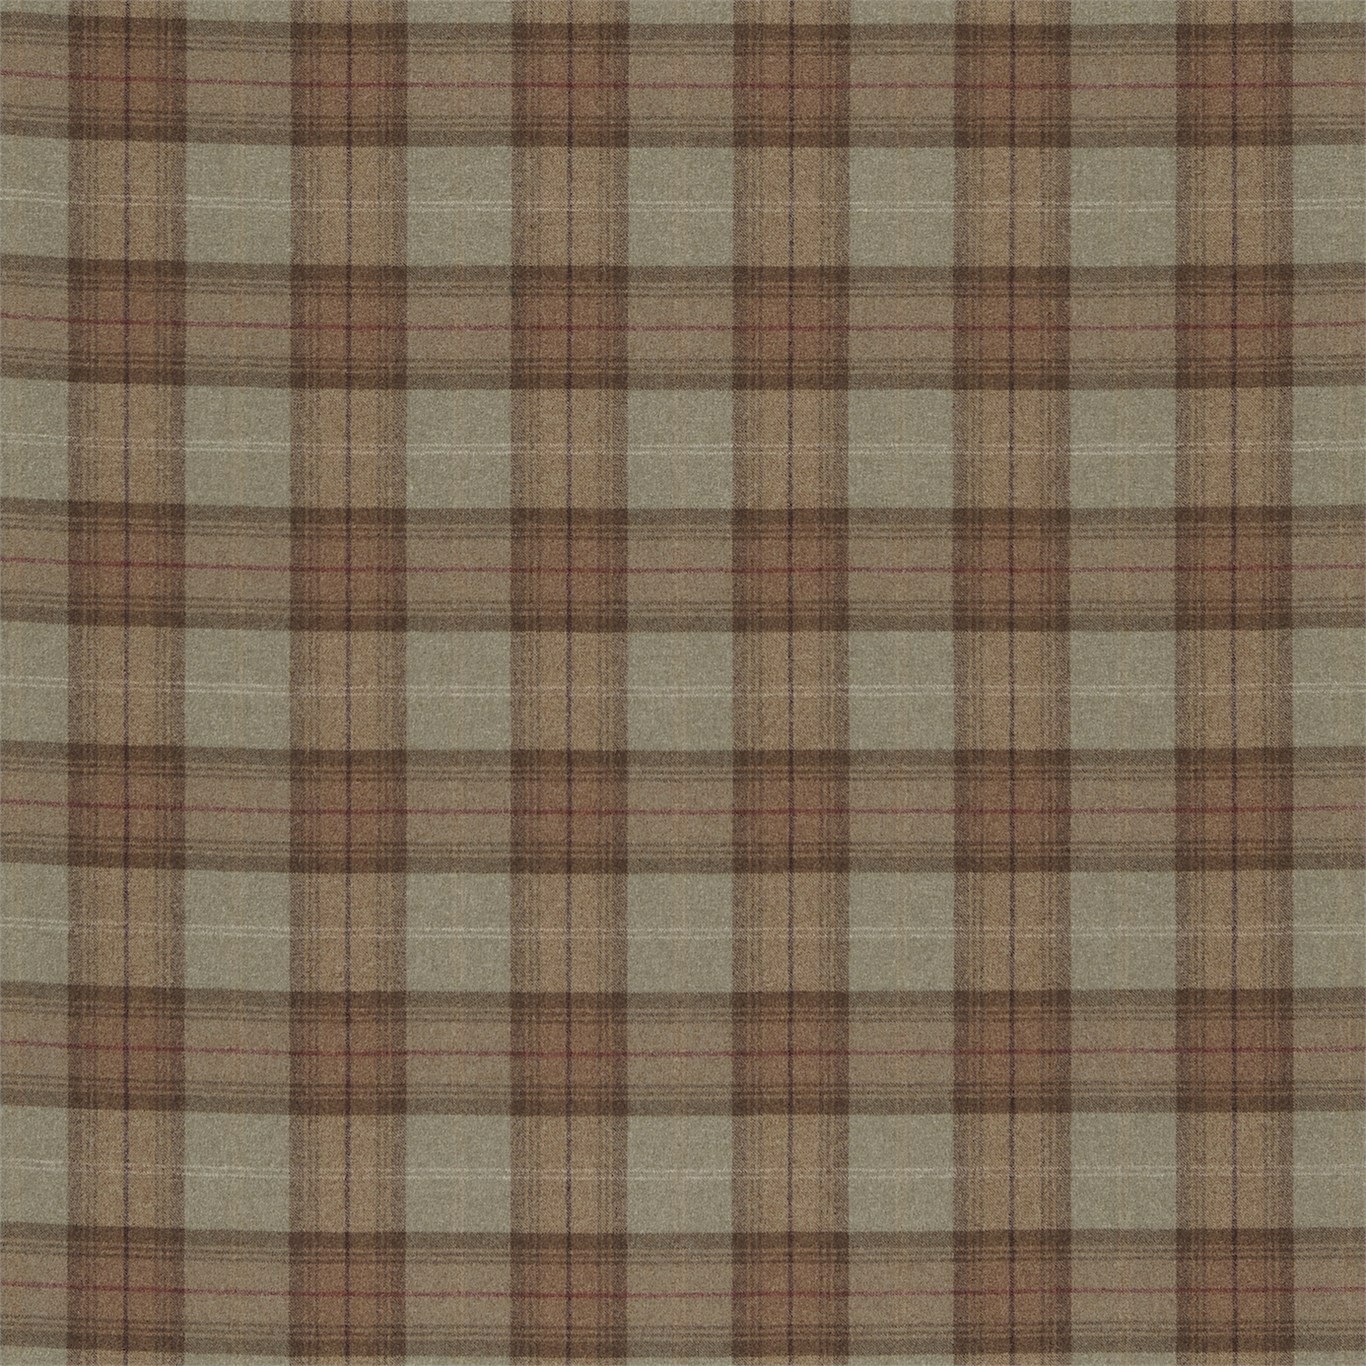 Woodford Plaid Loden/Olive Fabric by MOR